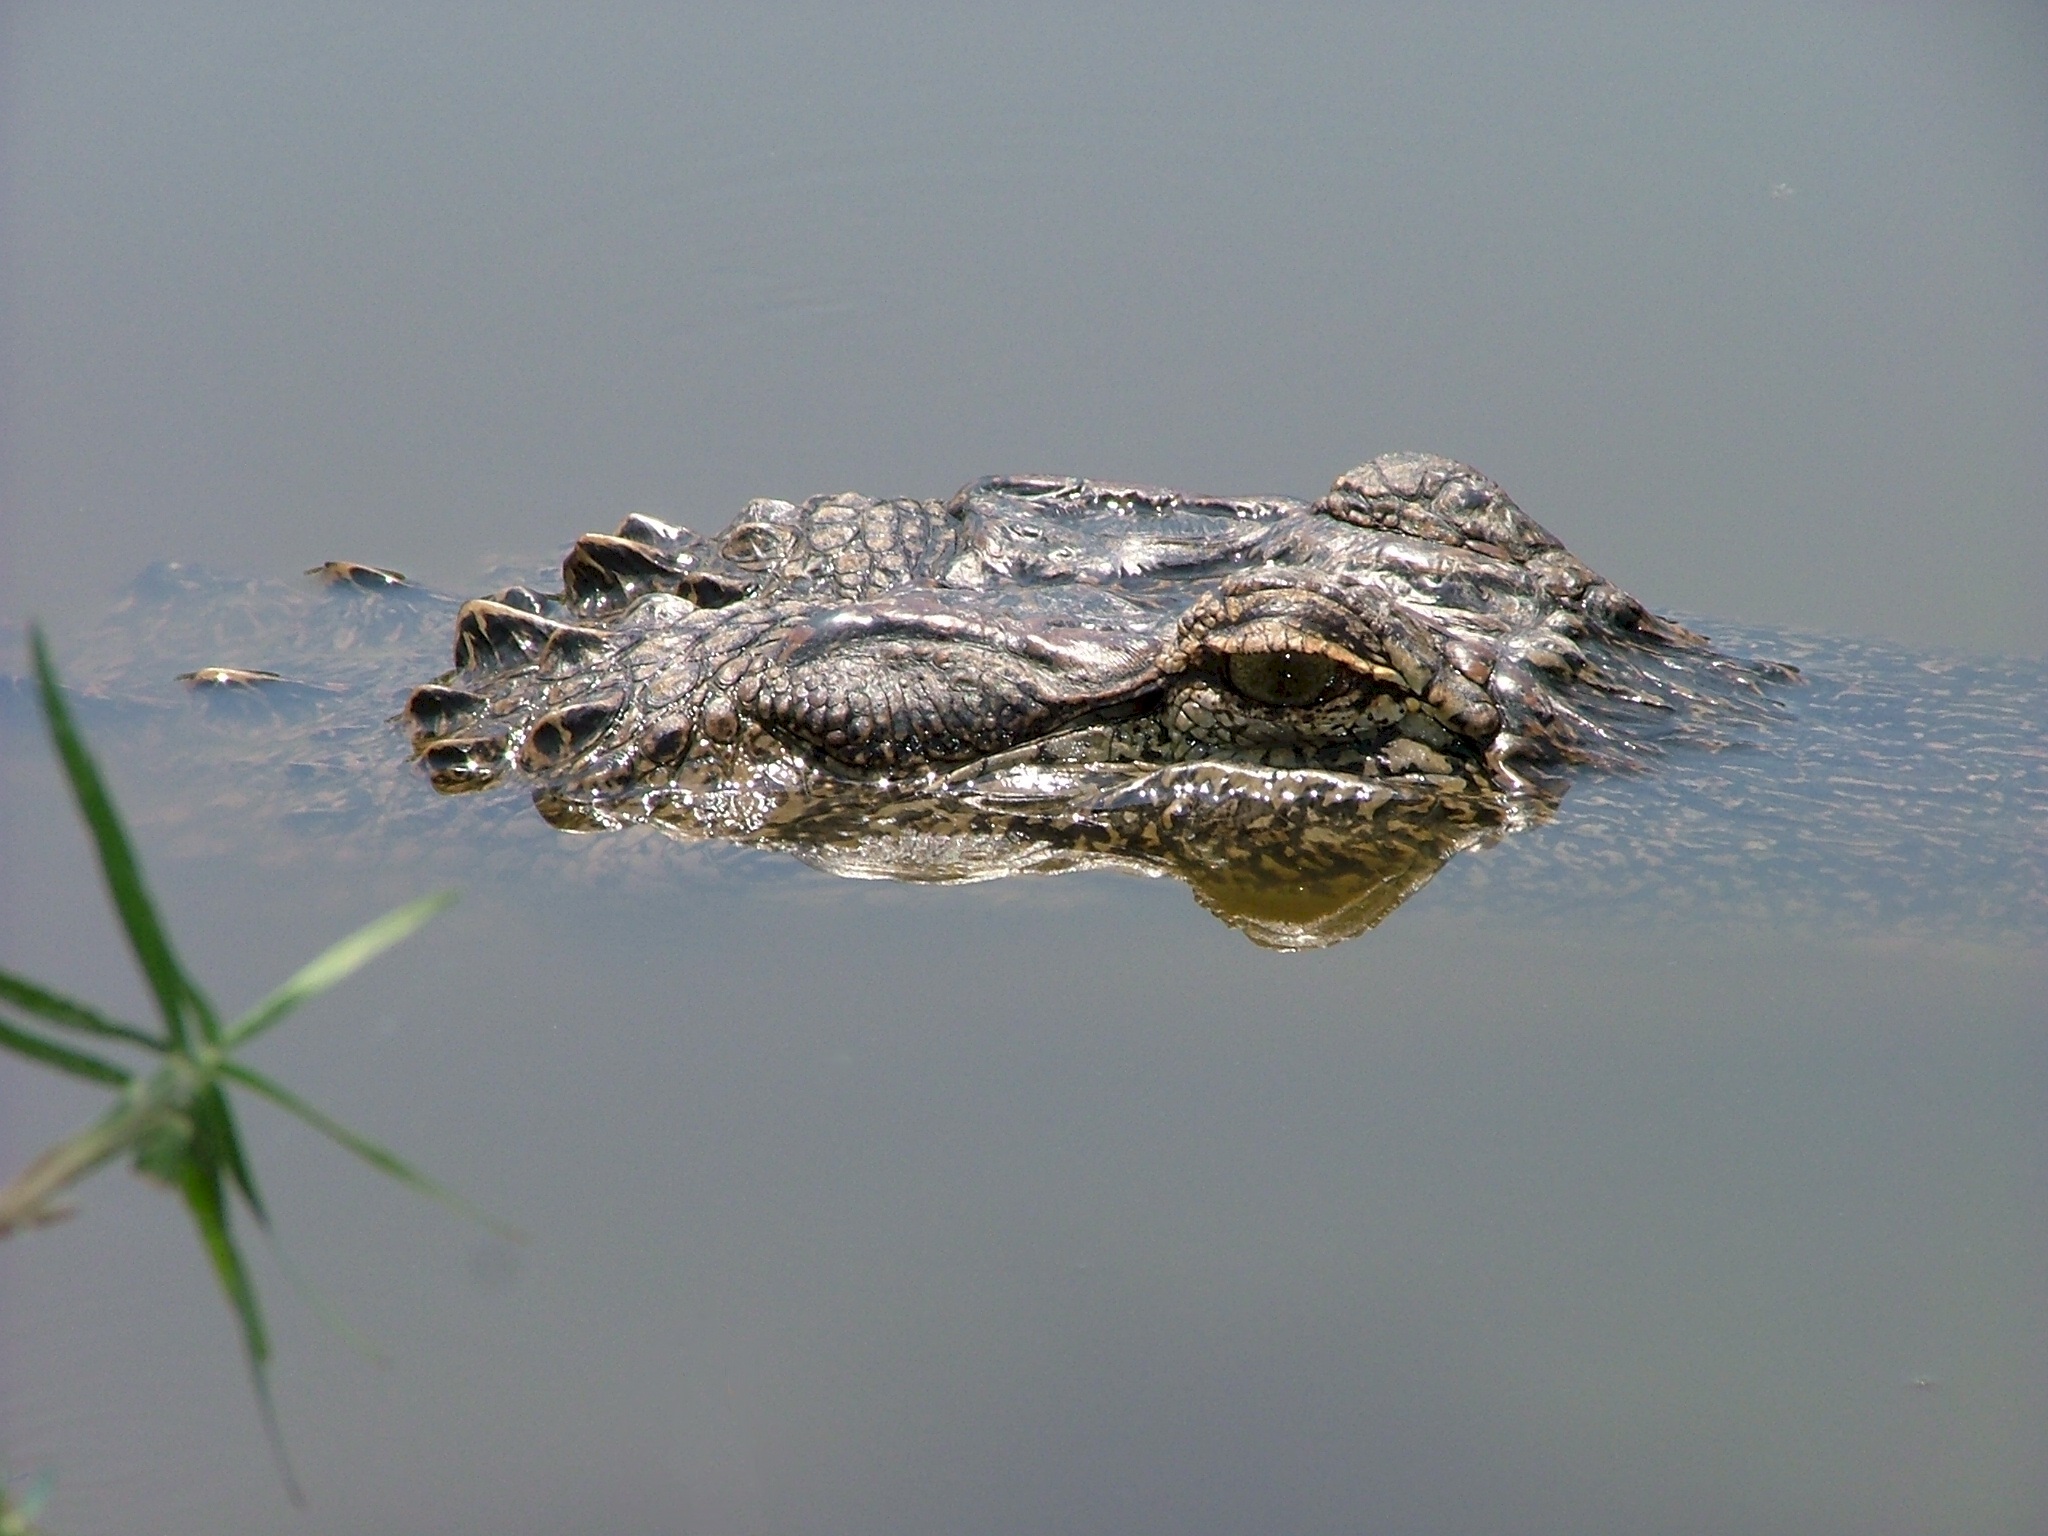 Alligator coming out of water photo